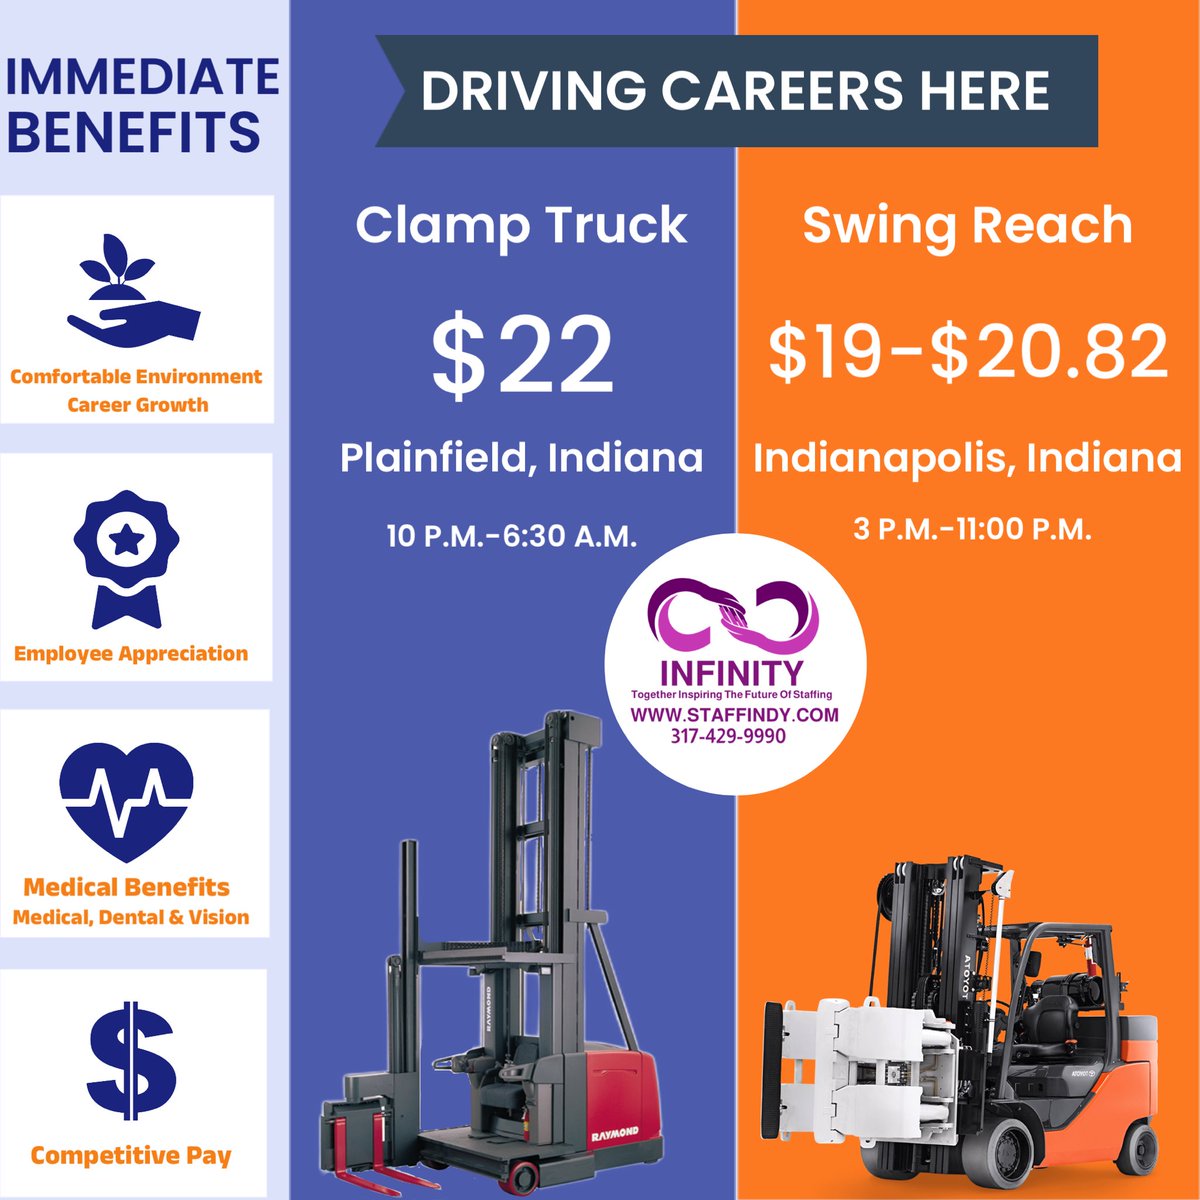 Your DRIVING CAREER awaits, but HURRY because the openings won’t stay open for long!!! 

#careers #indyjobs #important #jobs #jobsearch #indianapolisindiana #openings #hiring #applynow #plainfieldindiana #plainfield #warehousing